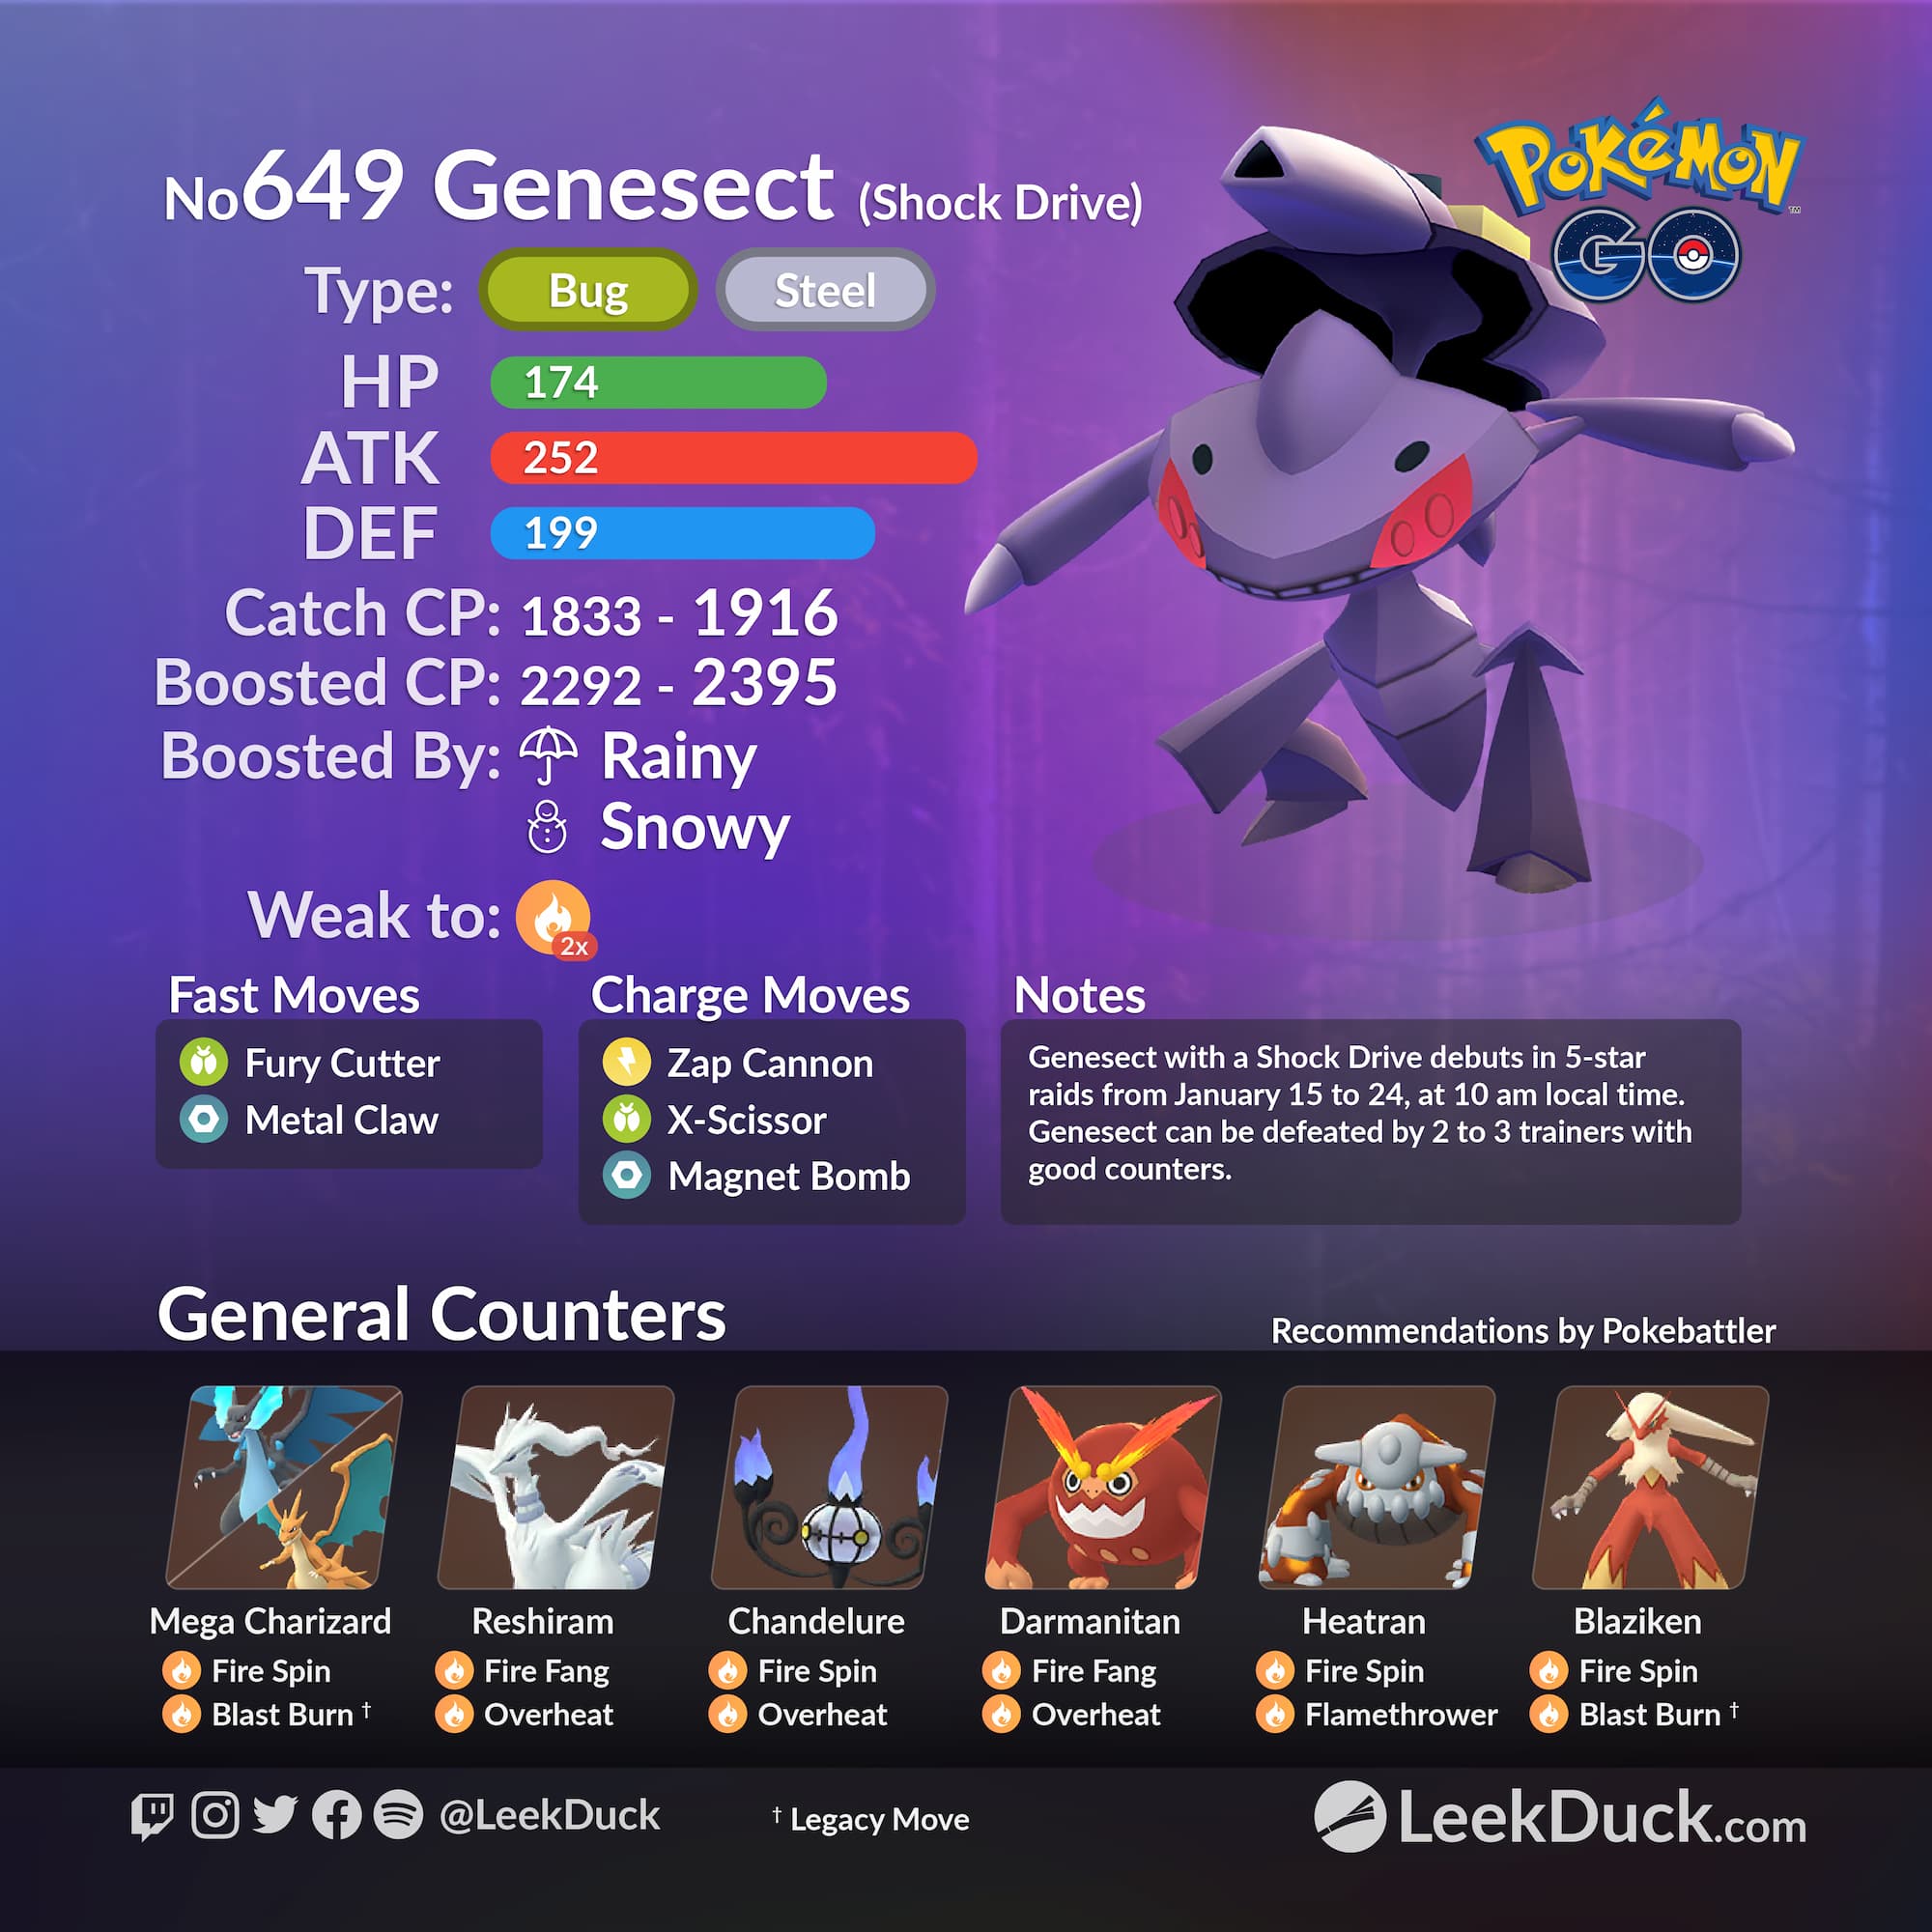 SHOCK DRIVE GENESECT* COUNTER GUIDE! 100 IVs & Moveset - BUG